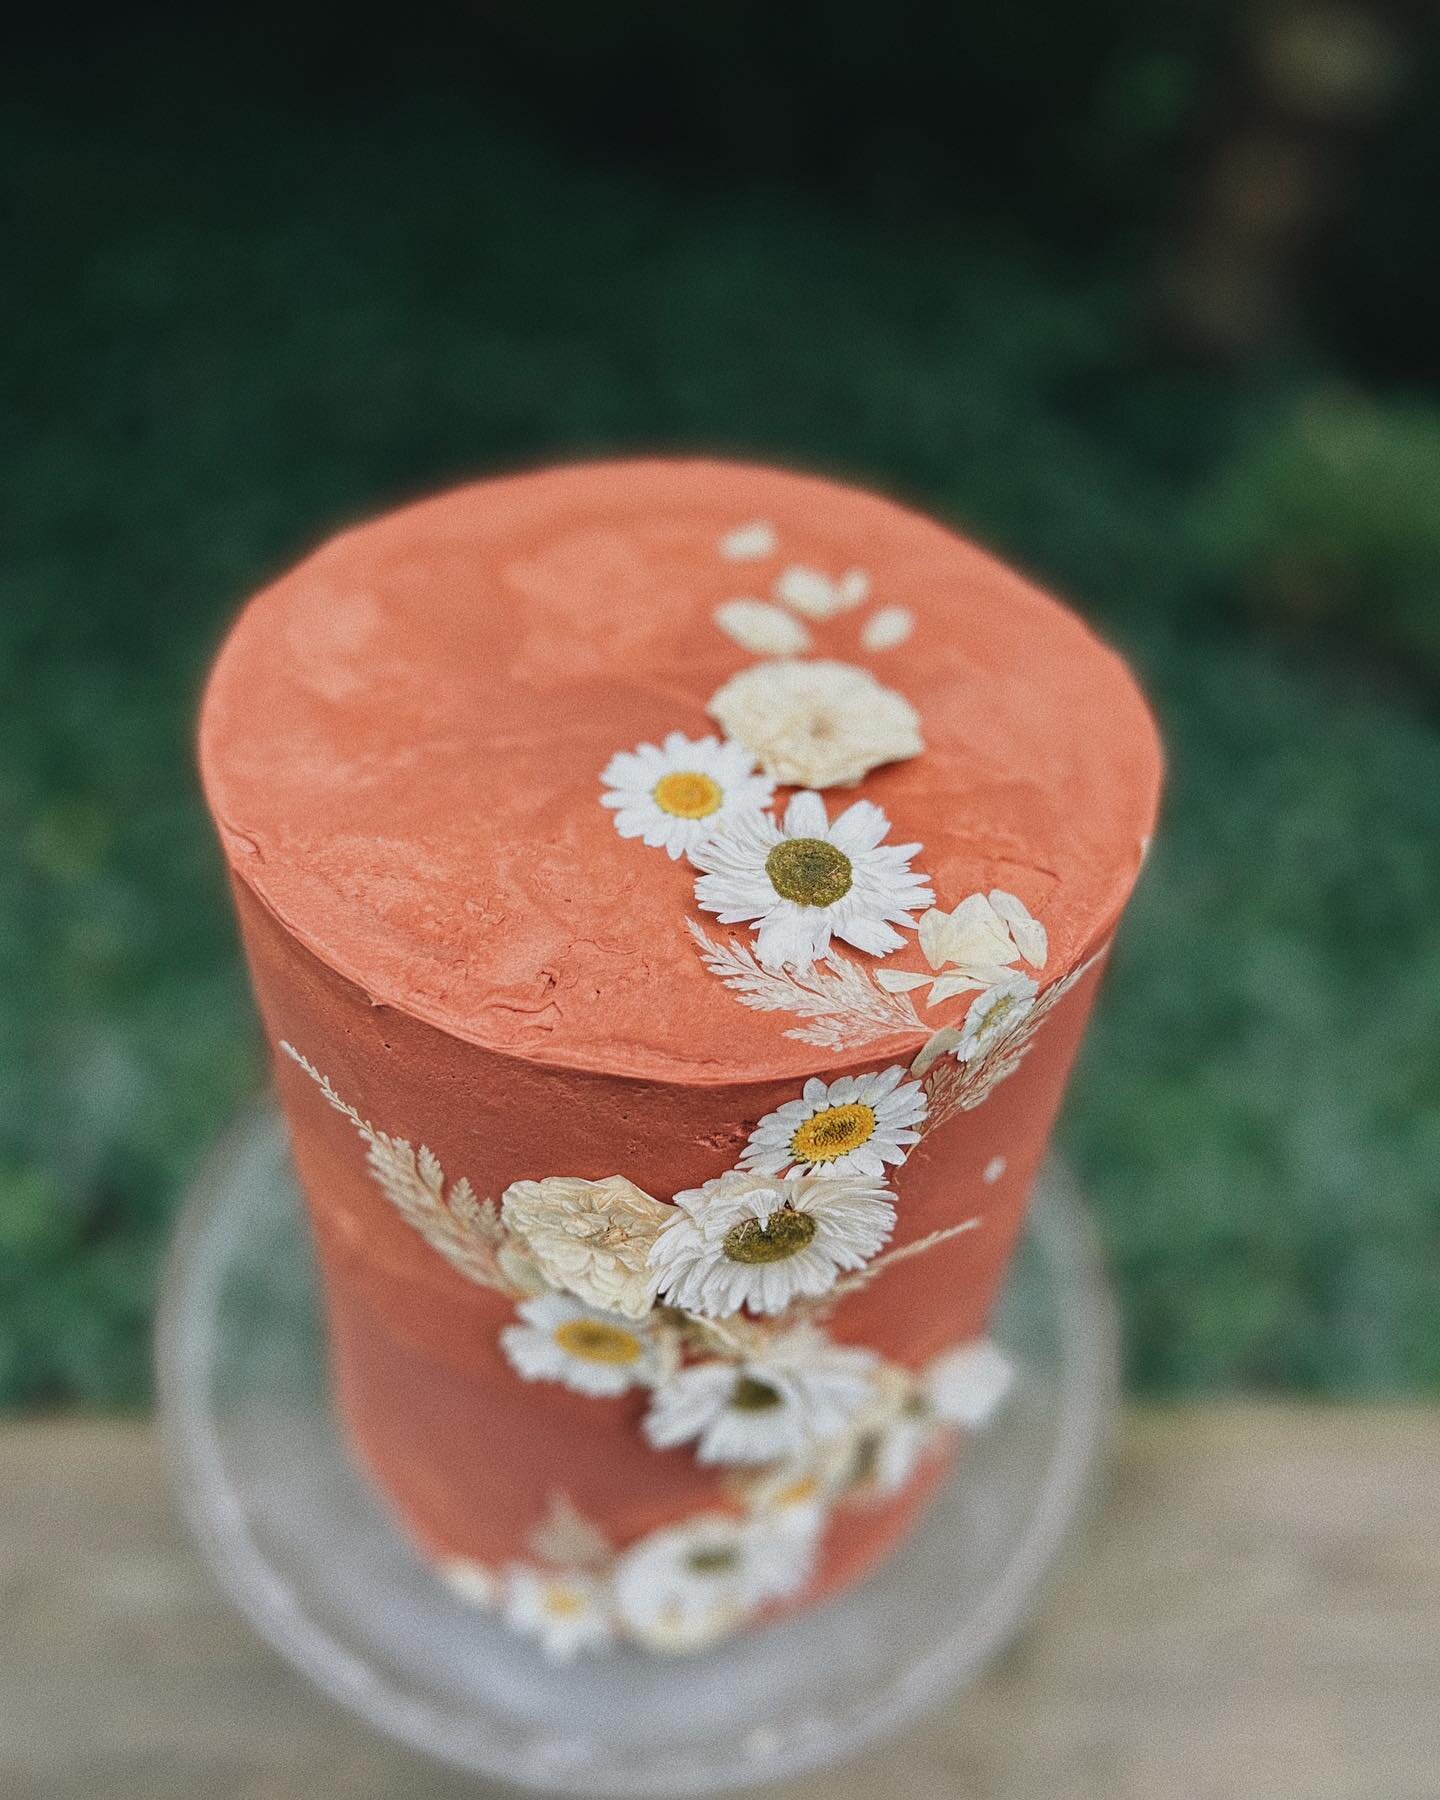 little raspberry lemon cutting cake covered in rust buttercream &amp; dried pressed flowers